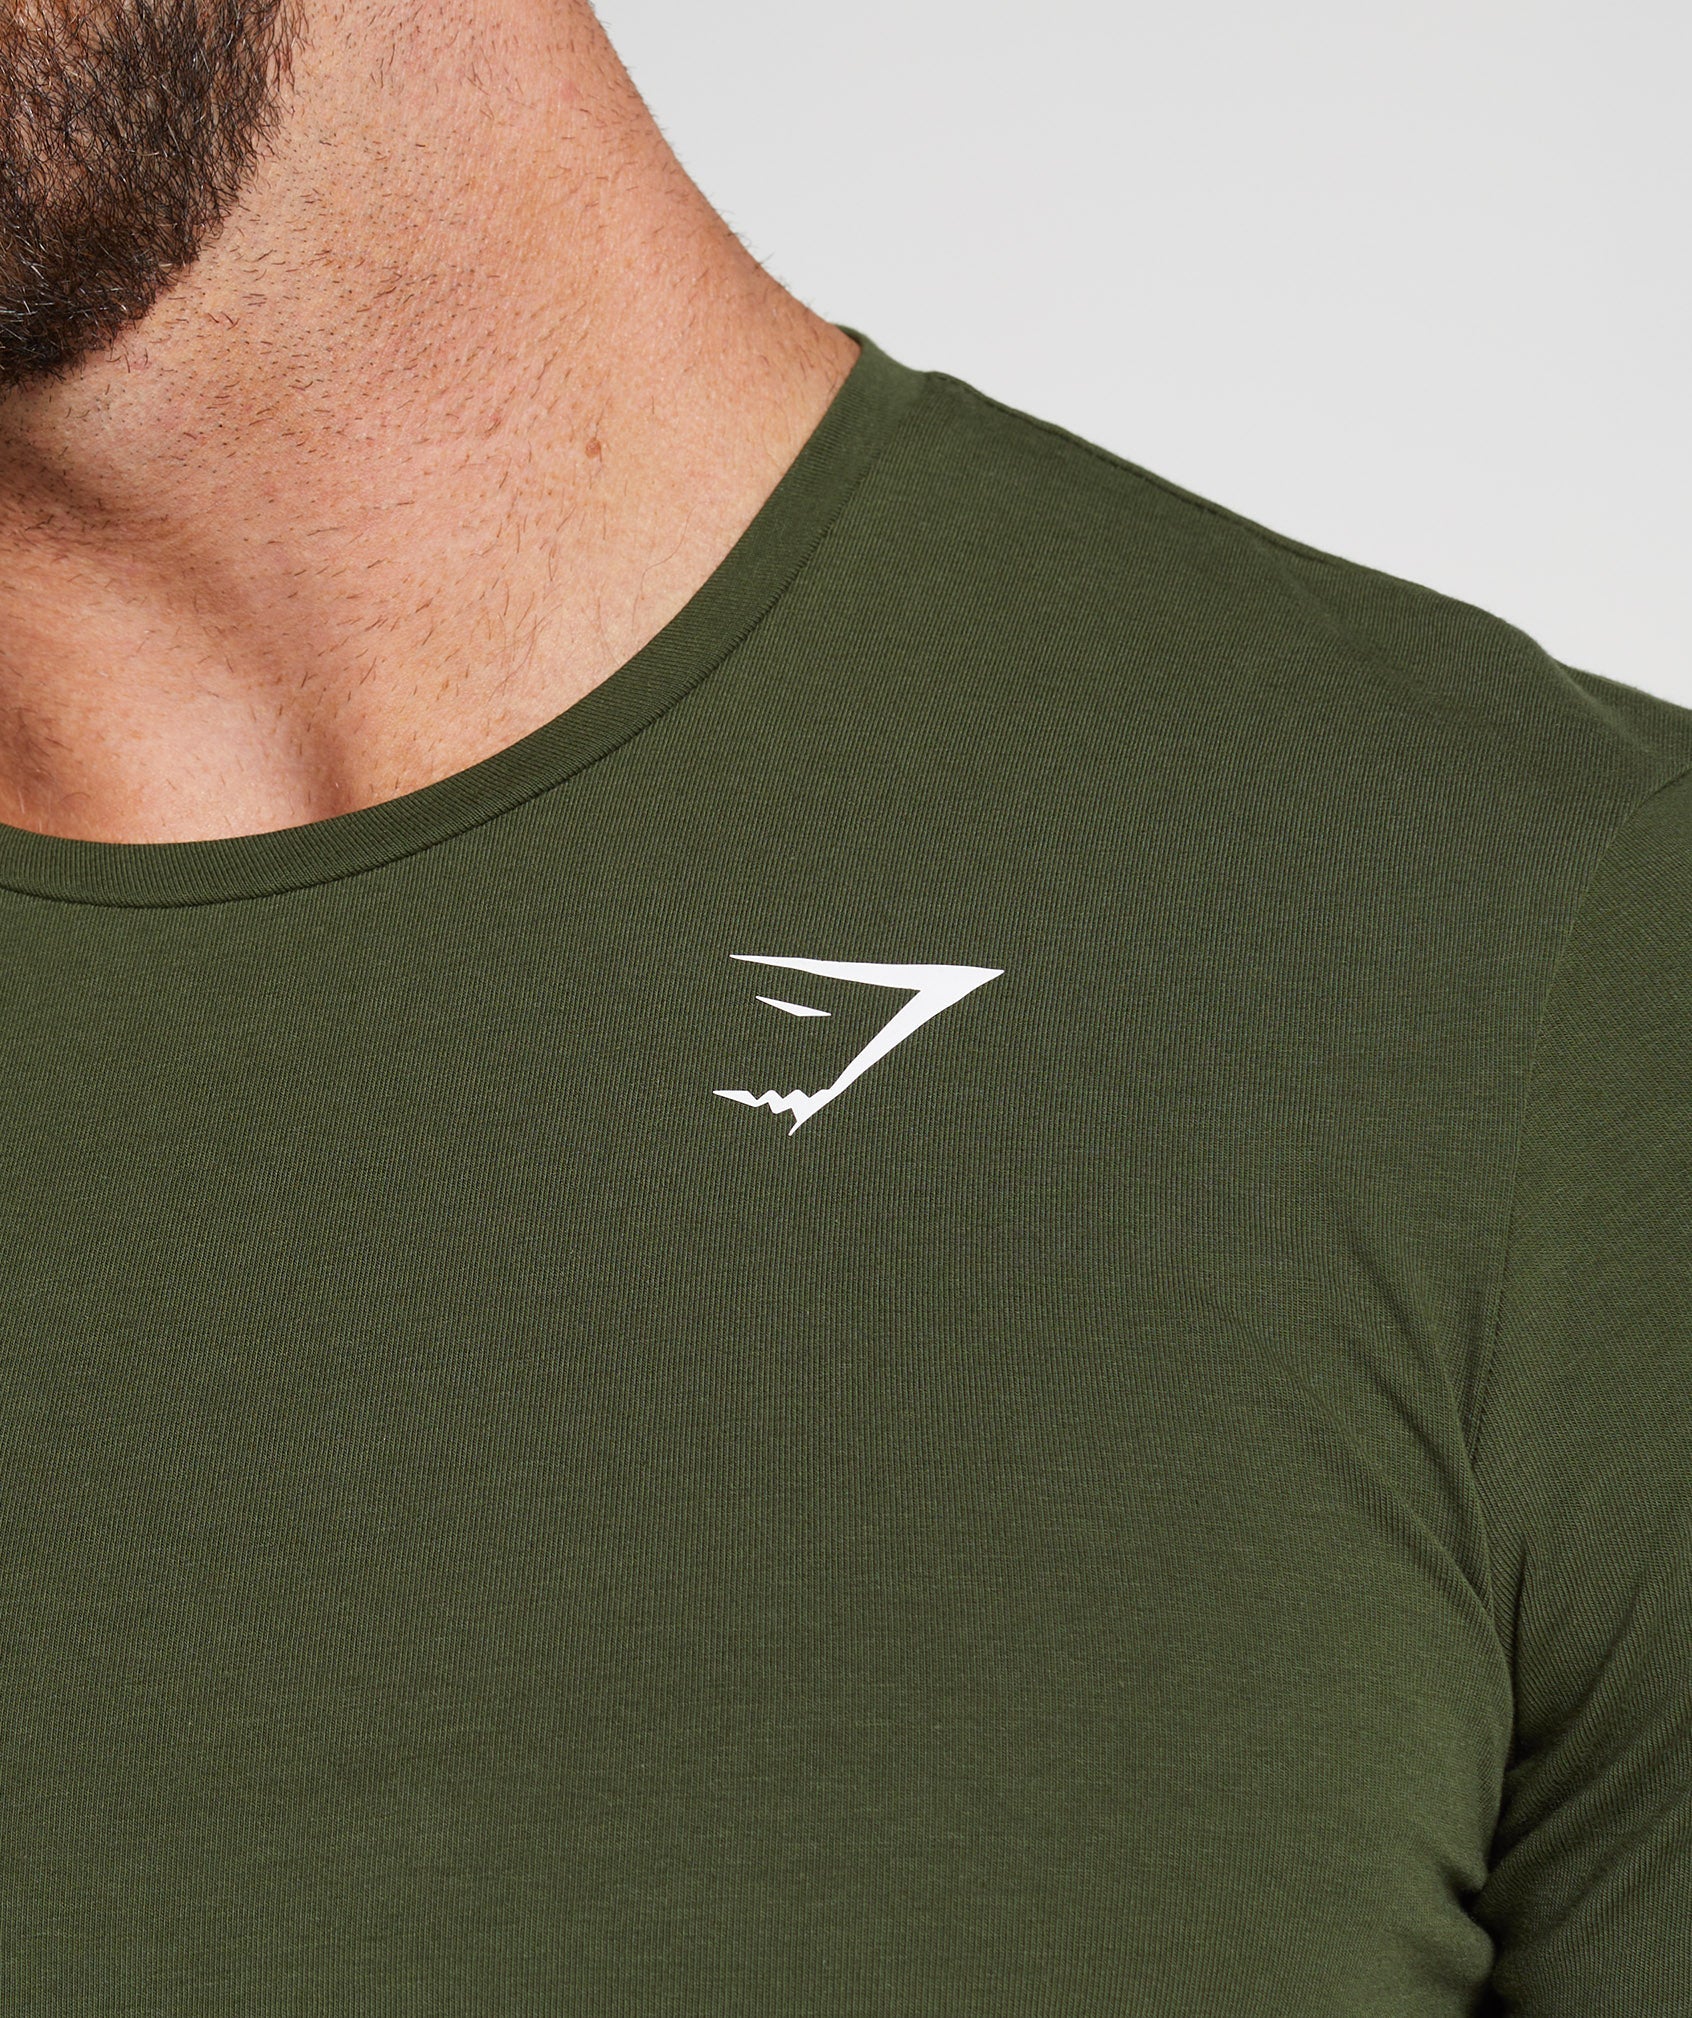 Essential T-Shirt in Moss Olive - view 3